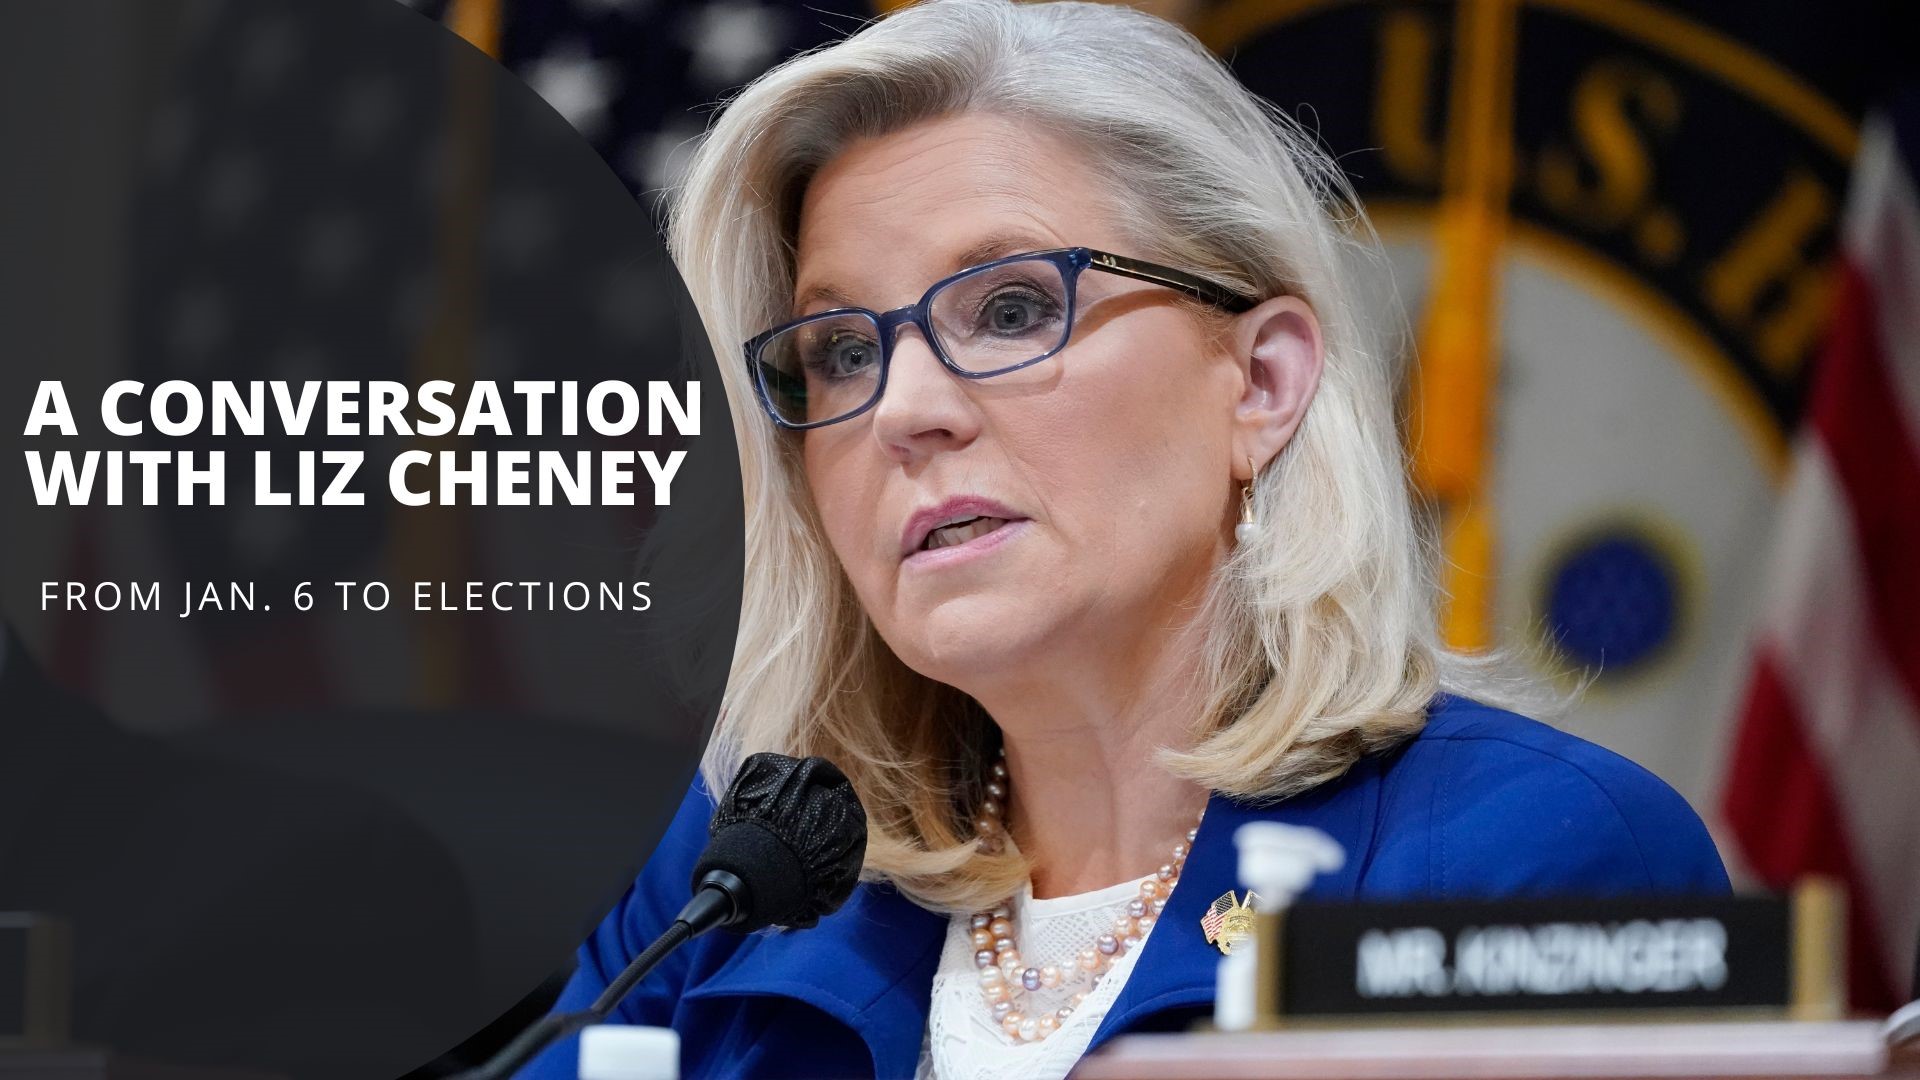 PBS NewsHour's Judy Woodruff has a wide-ranging discussion with Congresswoman Liz Cheney. The two discuss the Jan. 6 investigation, 2022 election and more.